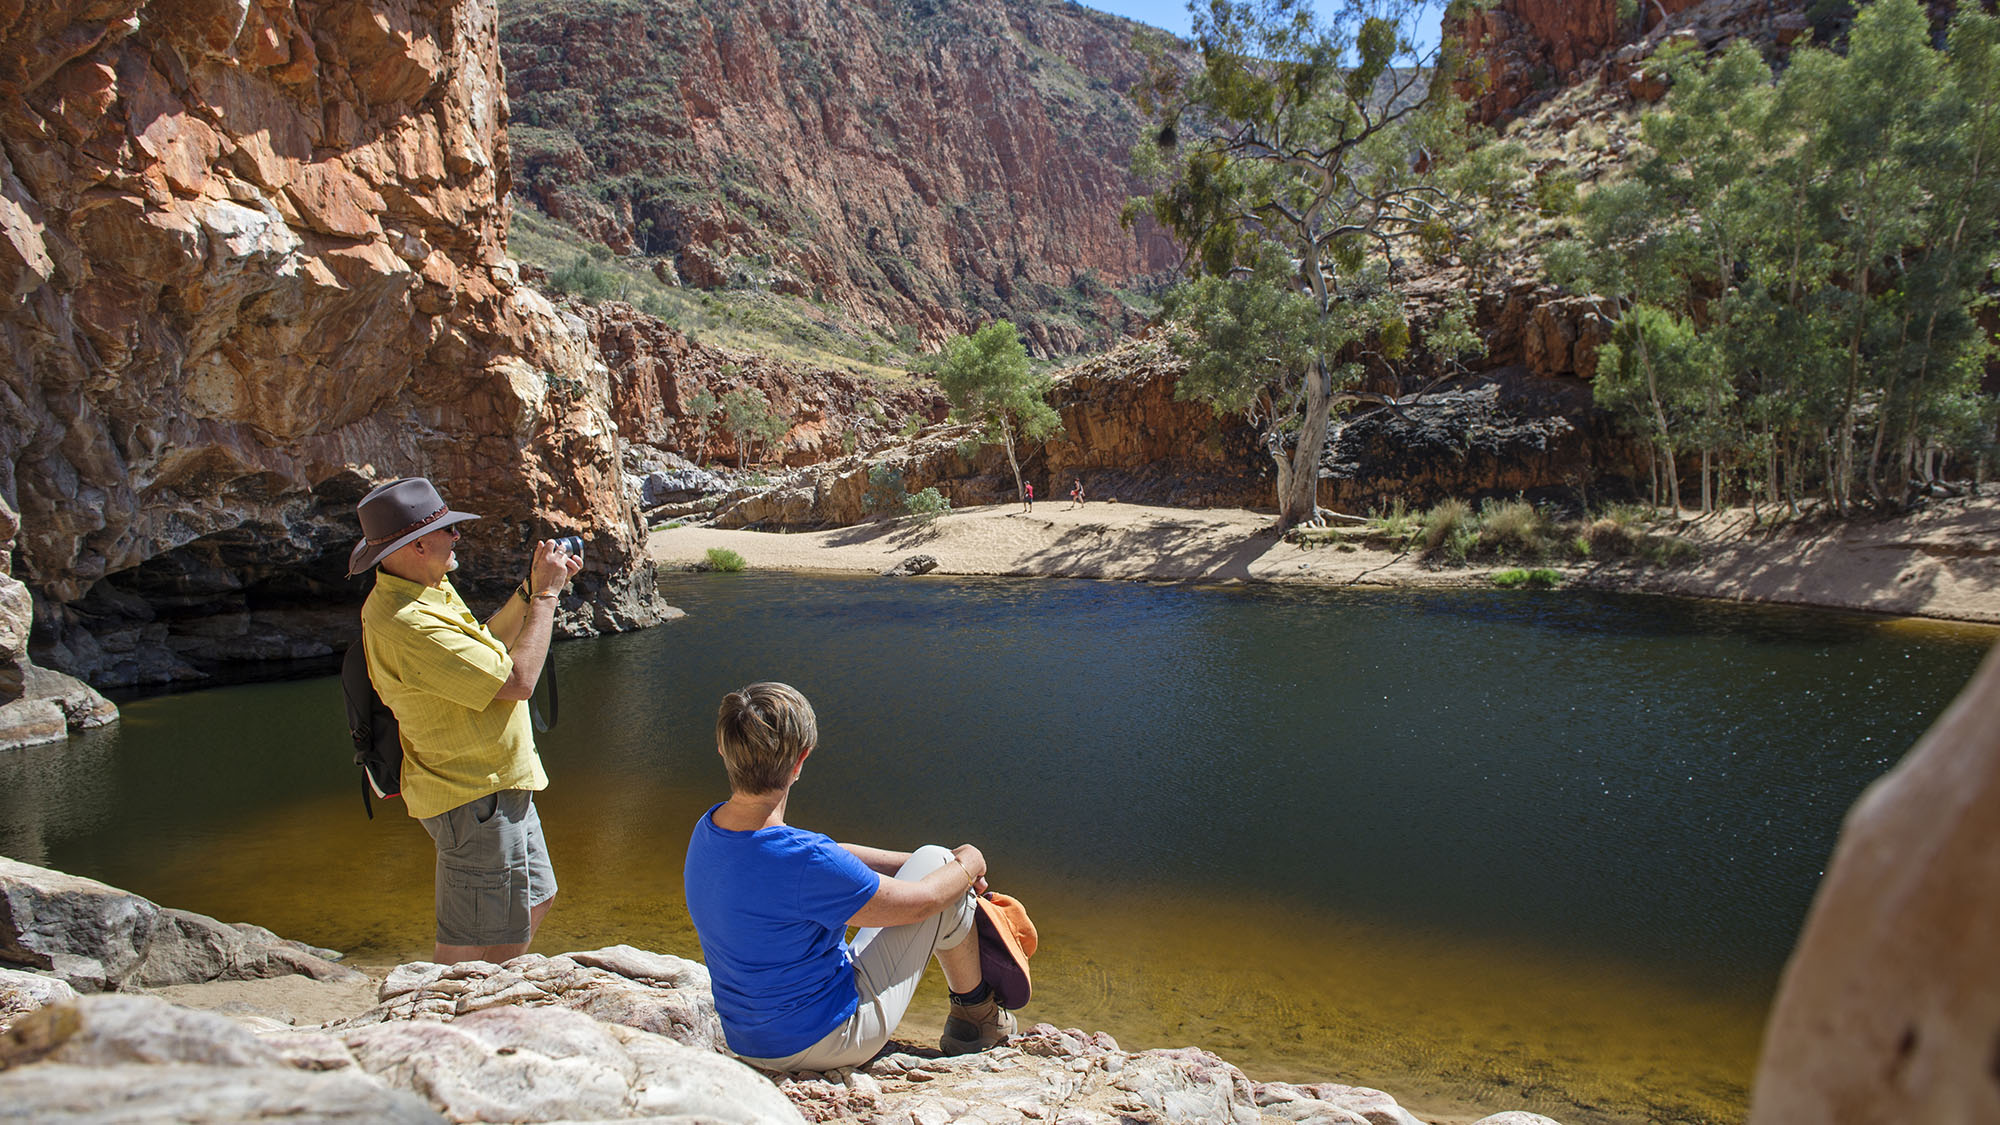 Alice Springs & Uluru Short Stay with West MacDonnell Ranges for 2 people